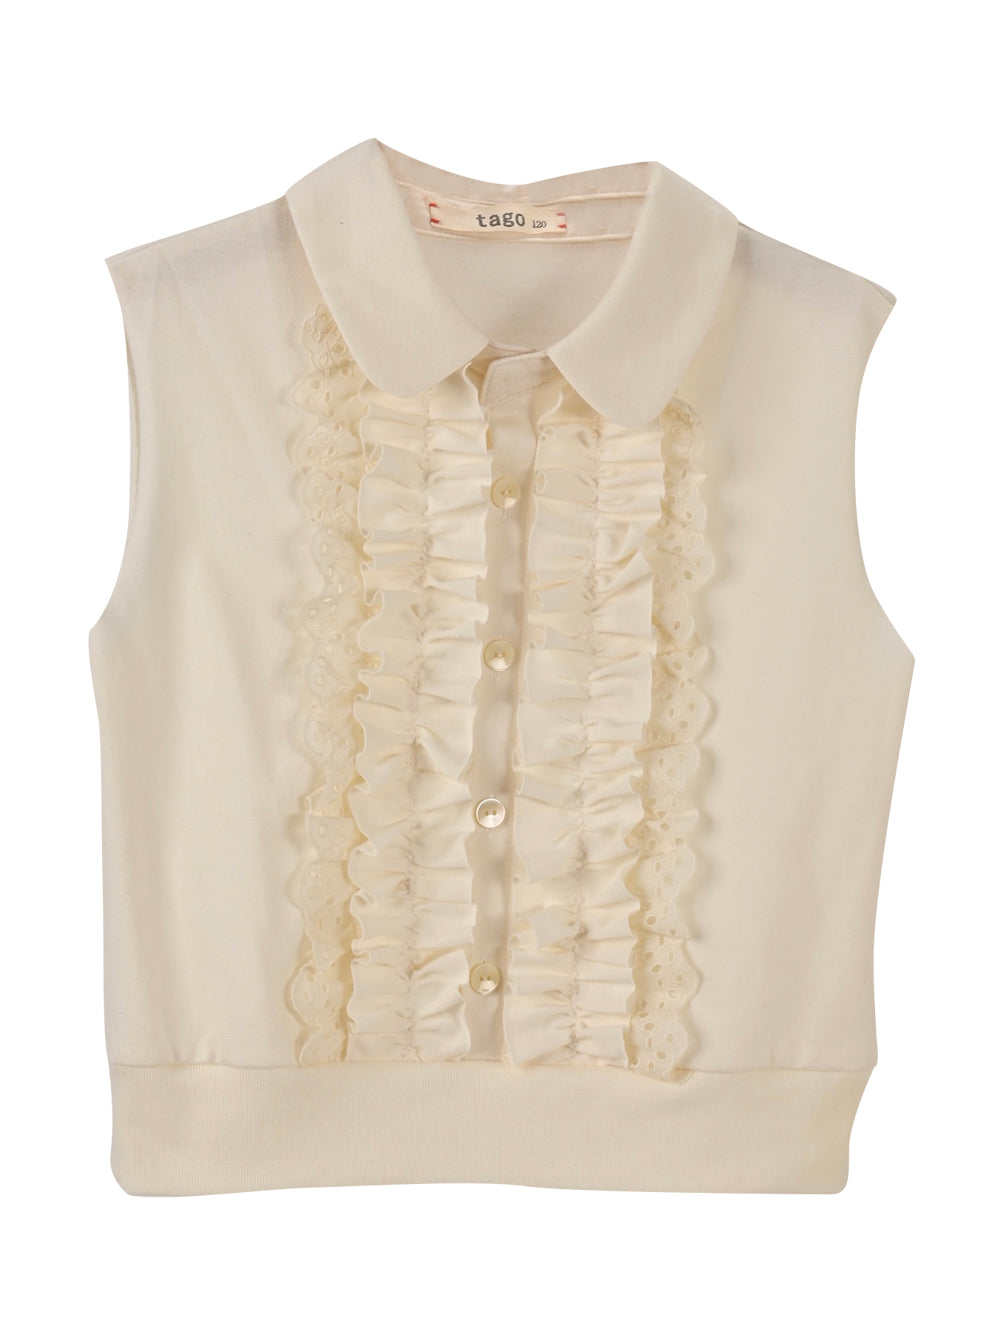 PREORDER: Ruffled Collared Top